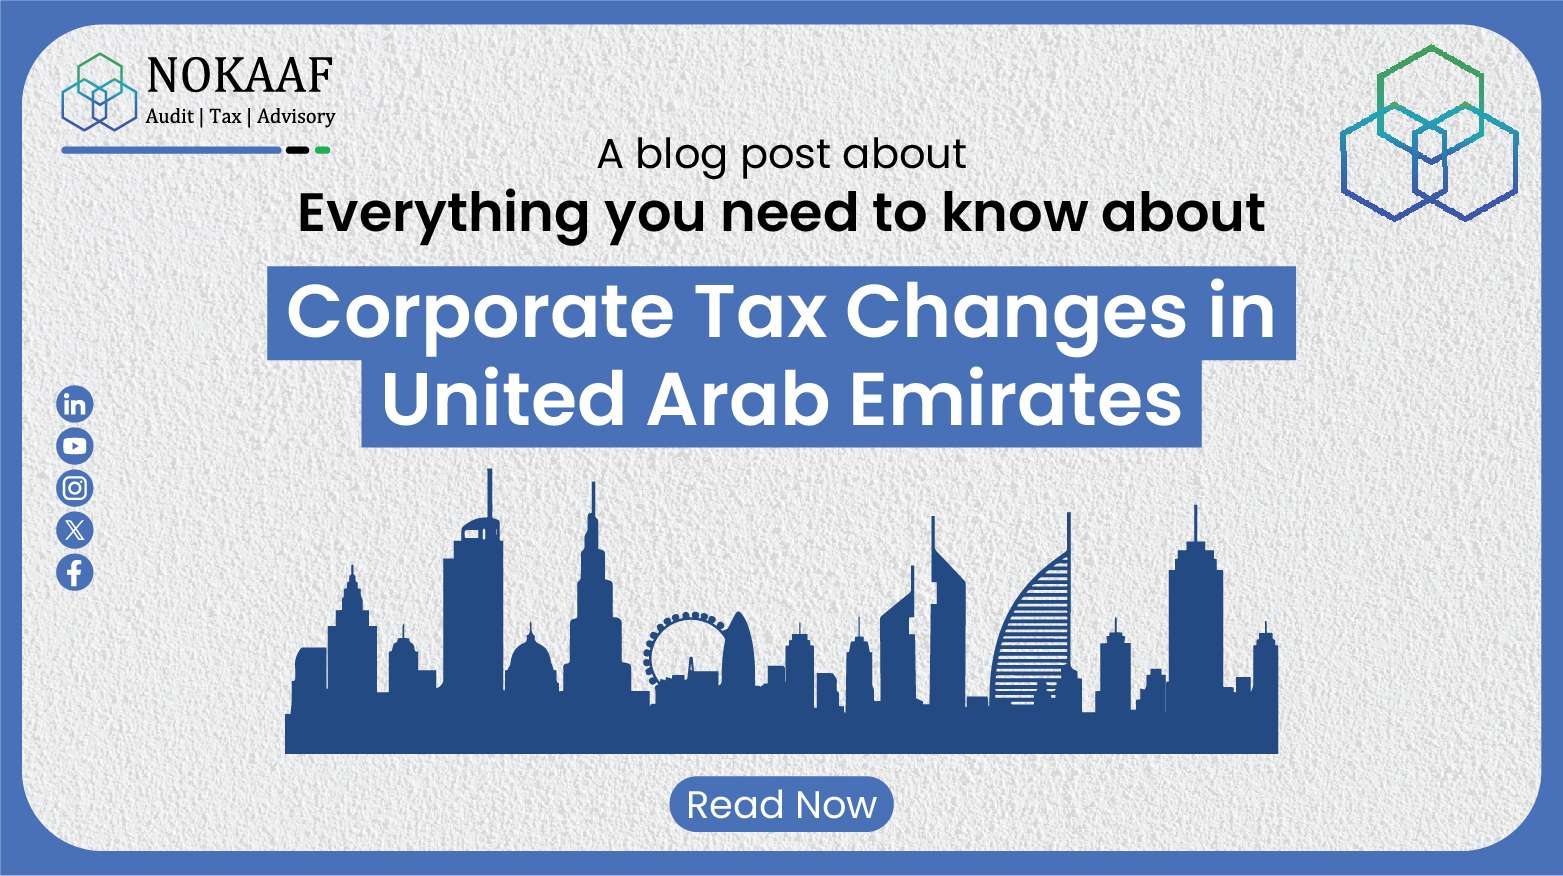 Corporate Tax Changes in UAE